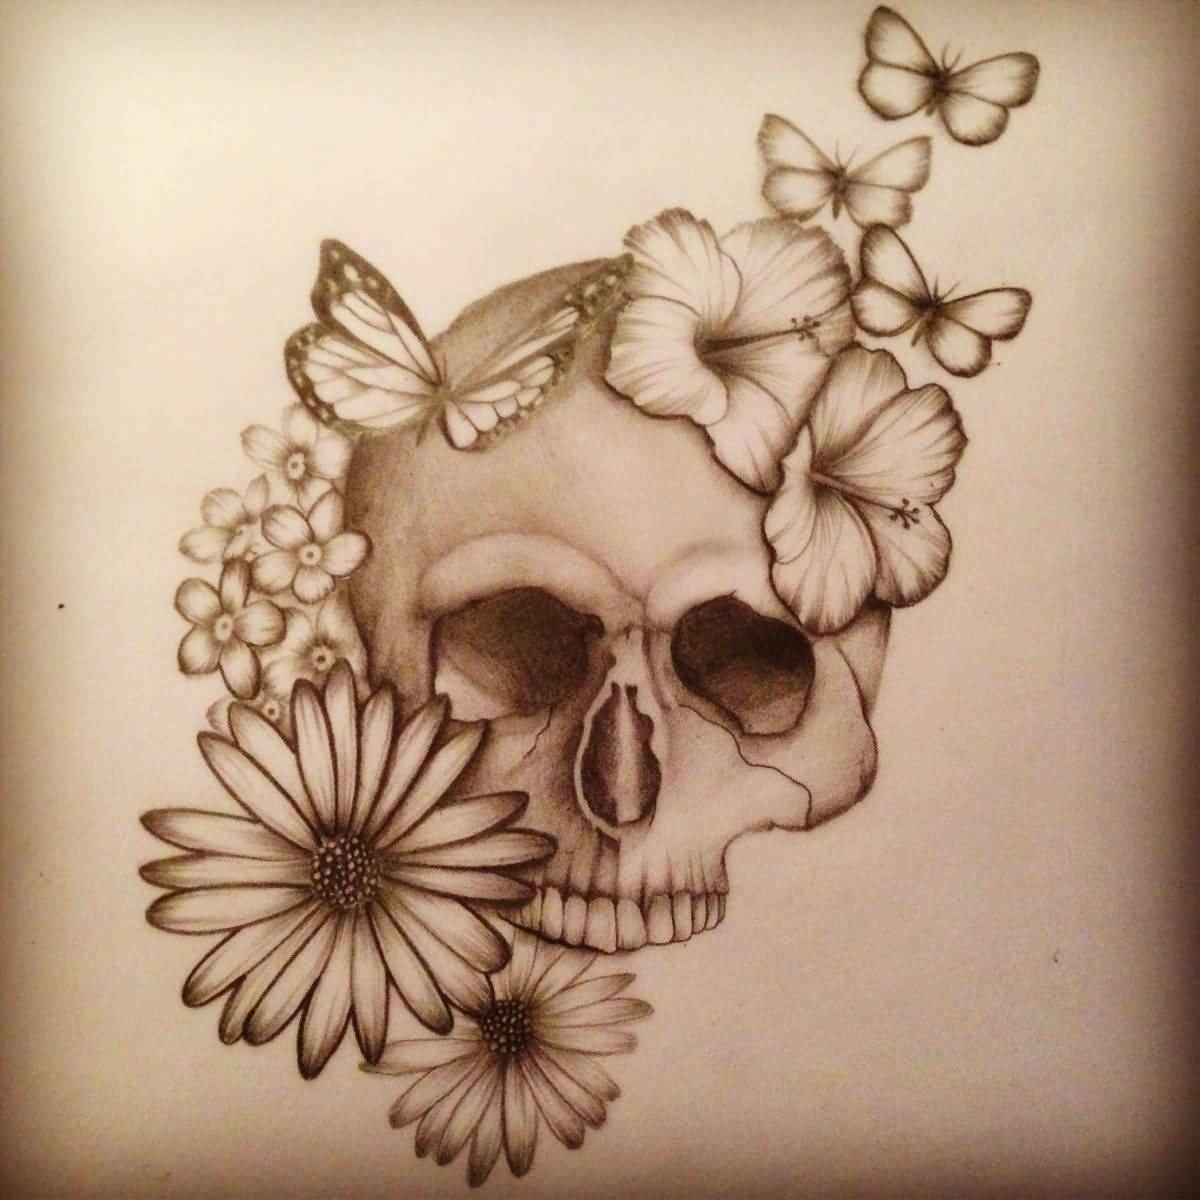 Grey Shaded Flower Skull With Butterflies Tattoo Design throughout dimensions 1200 X 1200